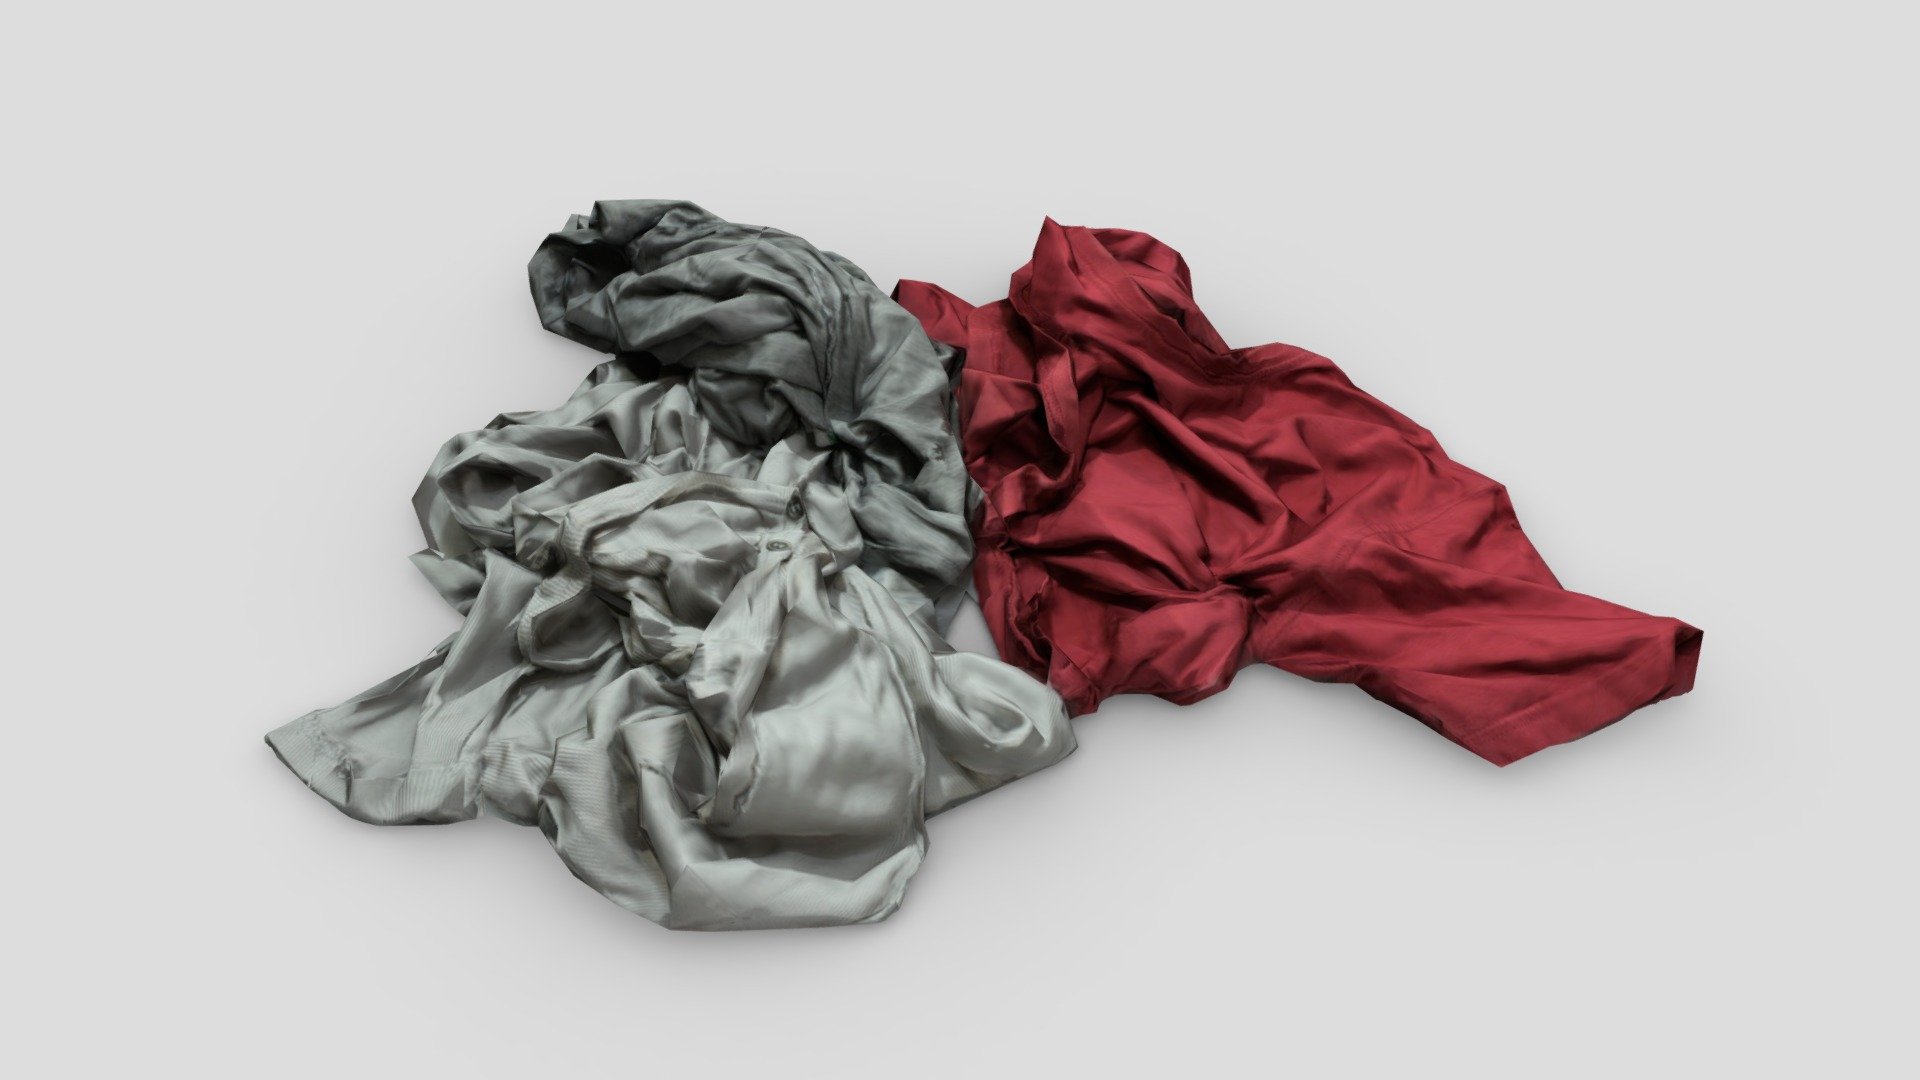 A small pile of clothes on the floor, low poly and game ready.

Fully UV Mapped. Complete with Colour, Ambient Occlusion and Normal Map textures. Includes both OBJ and FBX formats 3d model